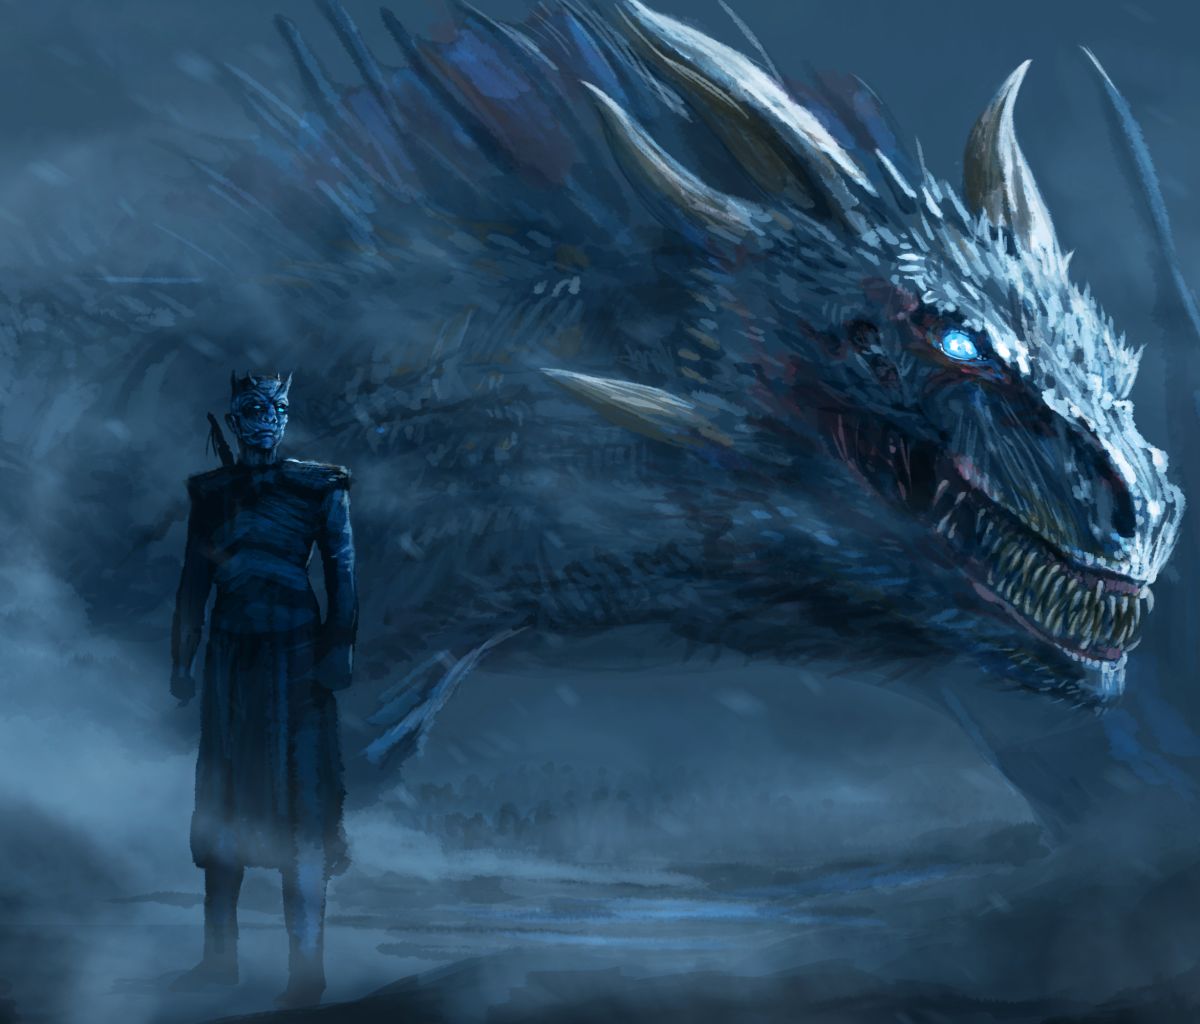 Cool Wallpapers tv show, game of thrones, white walker, night king (game of thrones), dragon